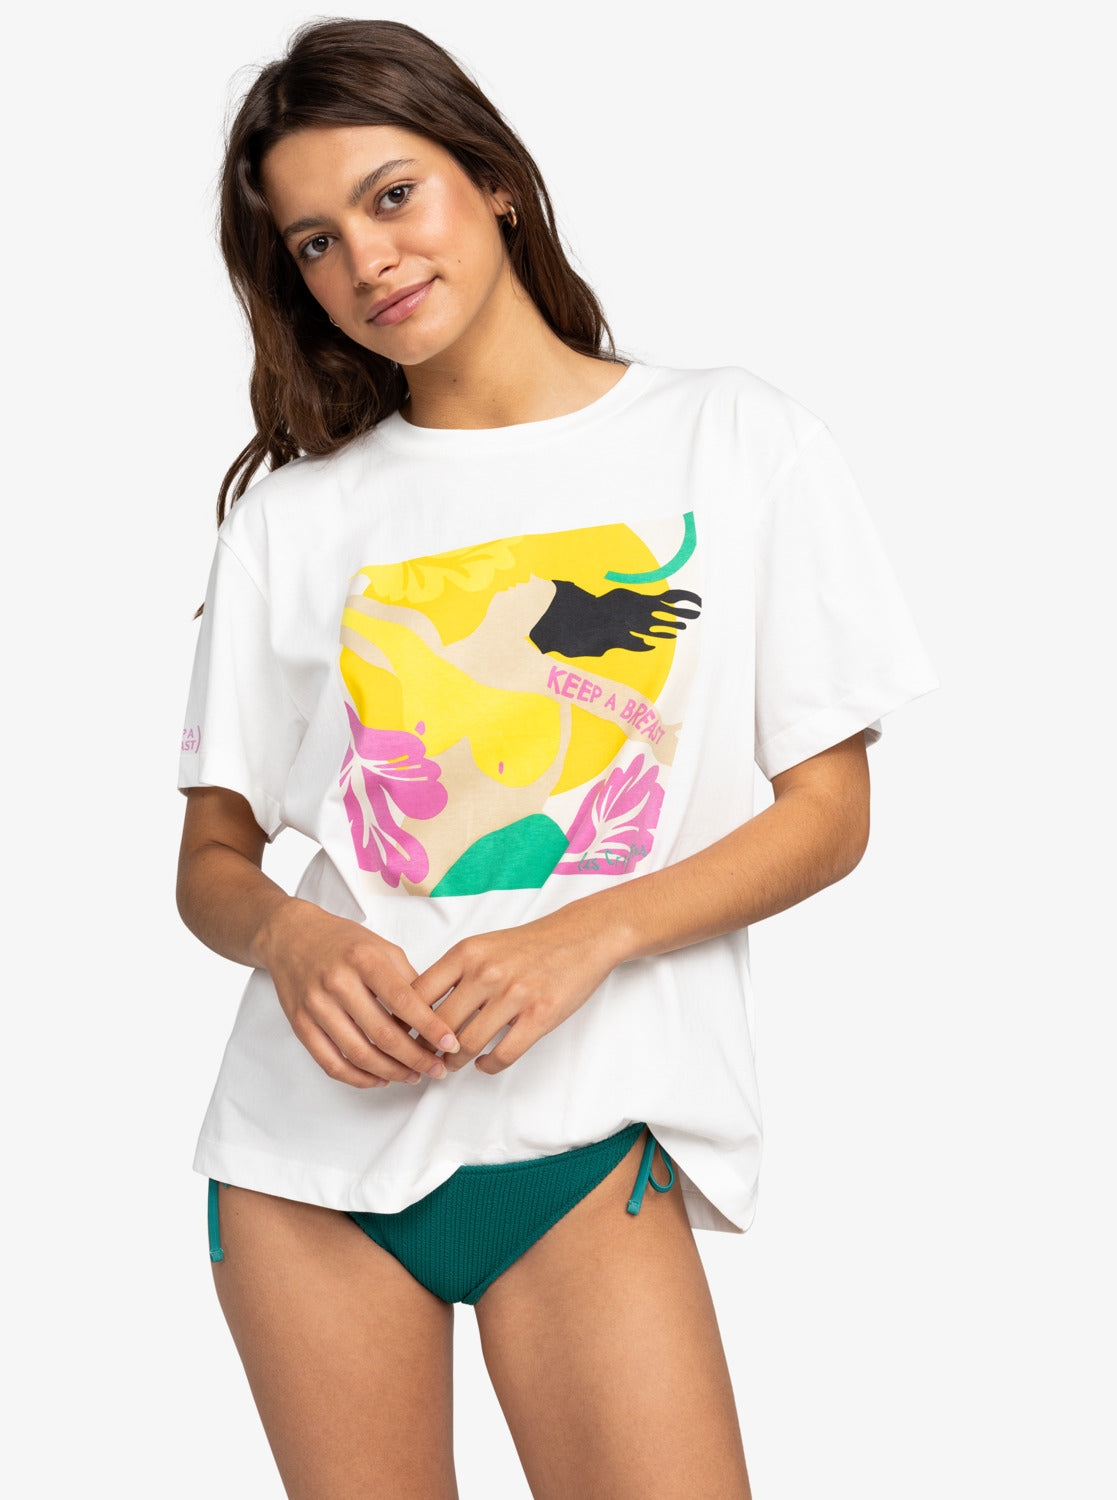 Keep A Breast Day T-Shirt - Snow White – Roxy.com